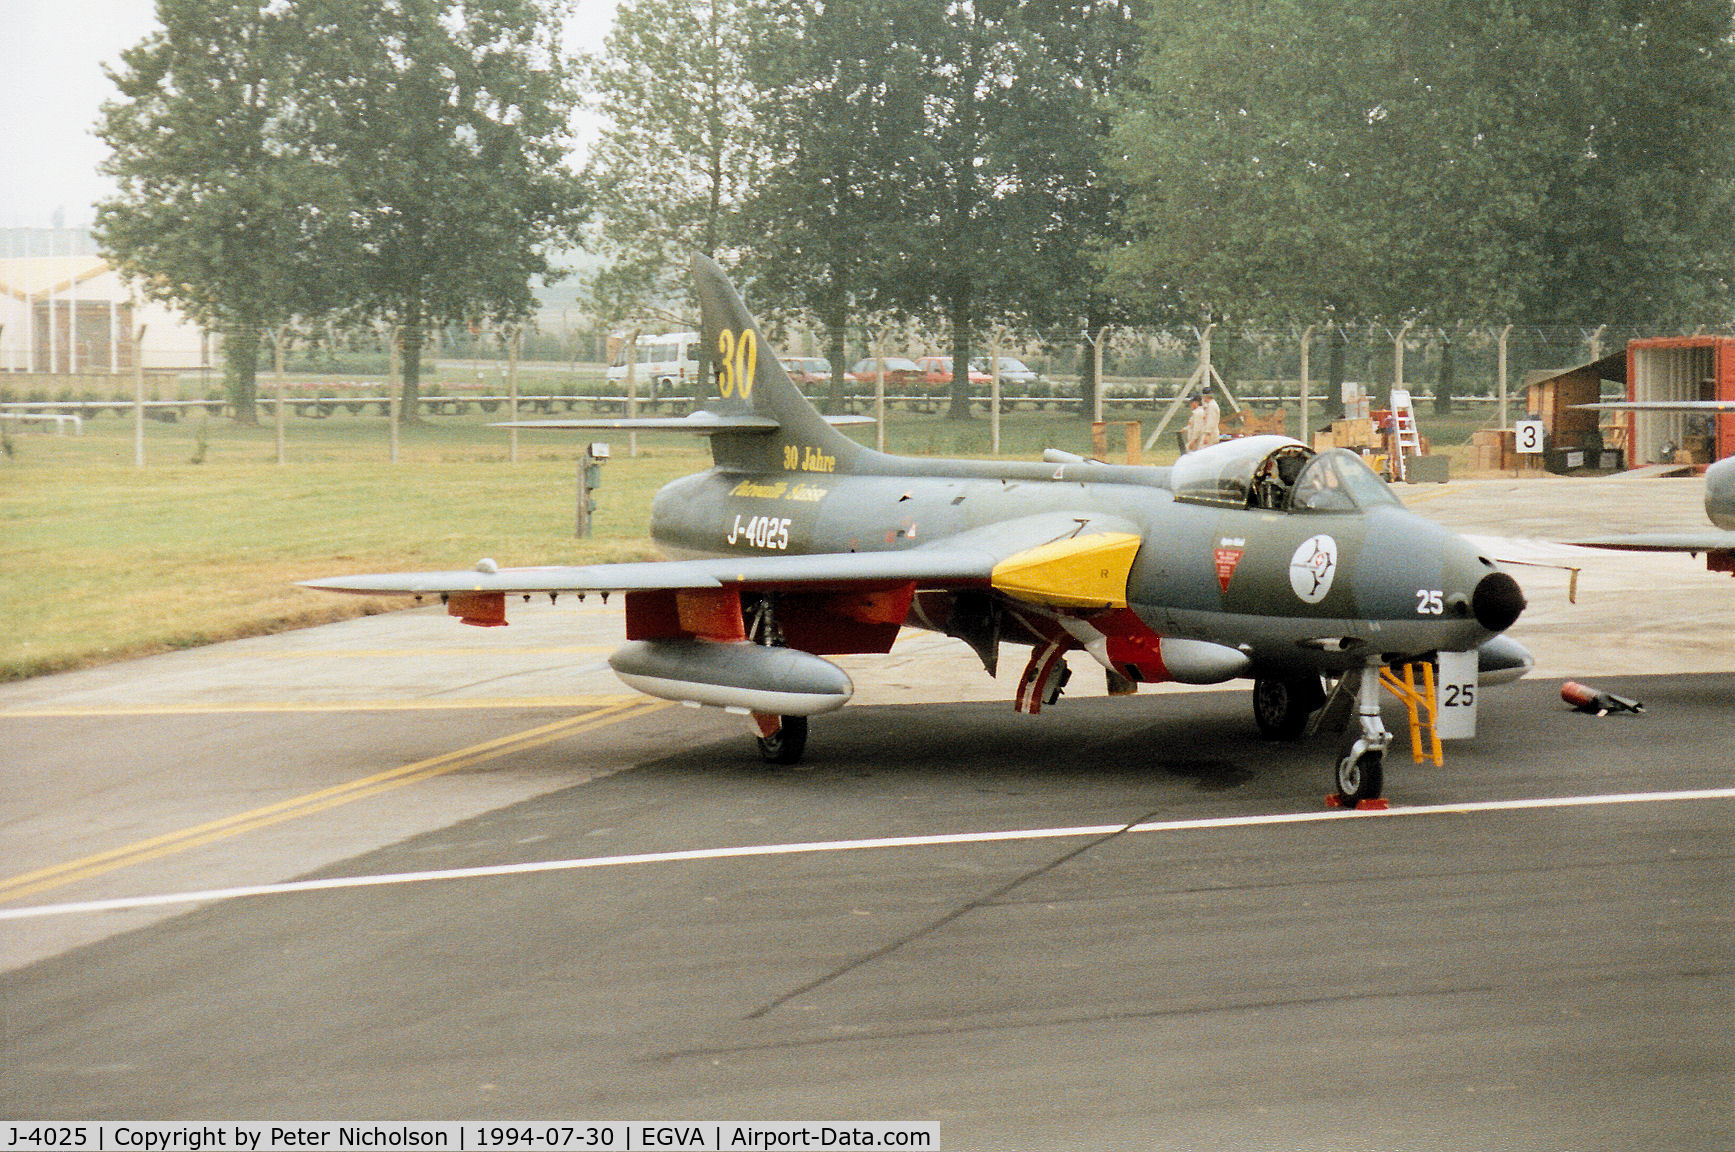 J-4025, 1959 Hawker Hunter F.58 C/N 41H-697394, Another view of this Hunter F.58 of the Patrouille Suisse display team on the flight-line at the 1994 Intnl Air Tattoo at RAF Fairford.